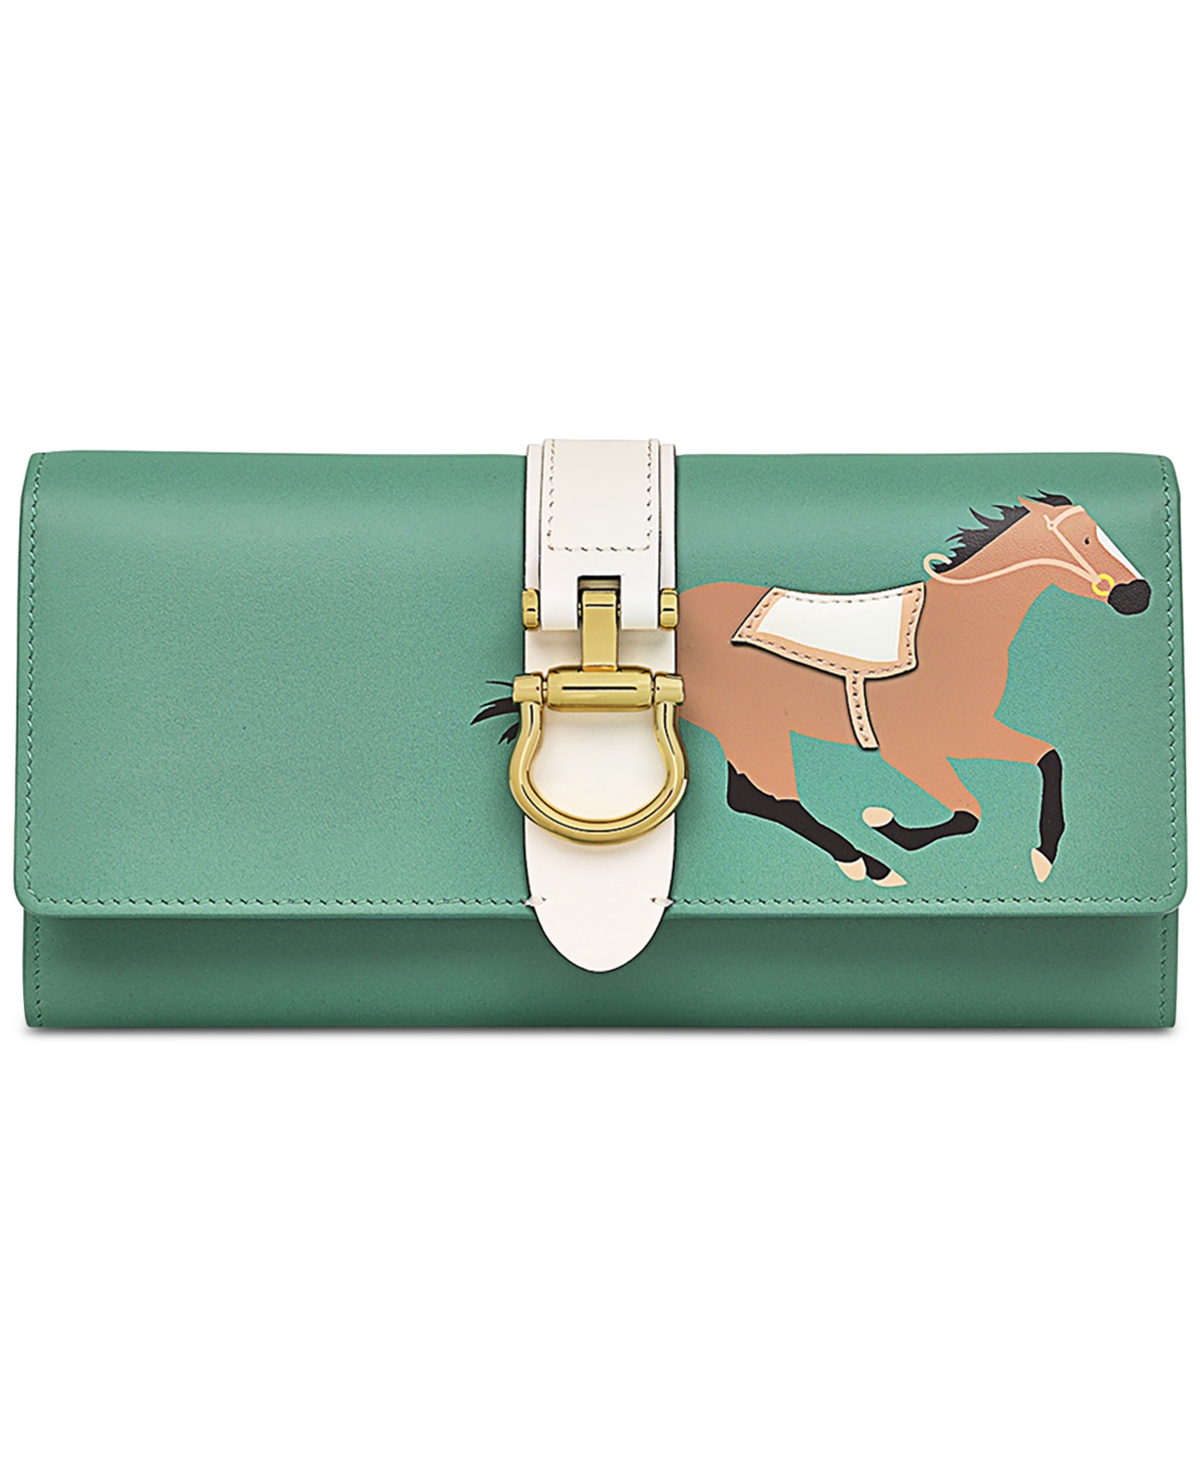 Radley London Kentucky Derby Large Leather Flapover Wallet In Cactus